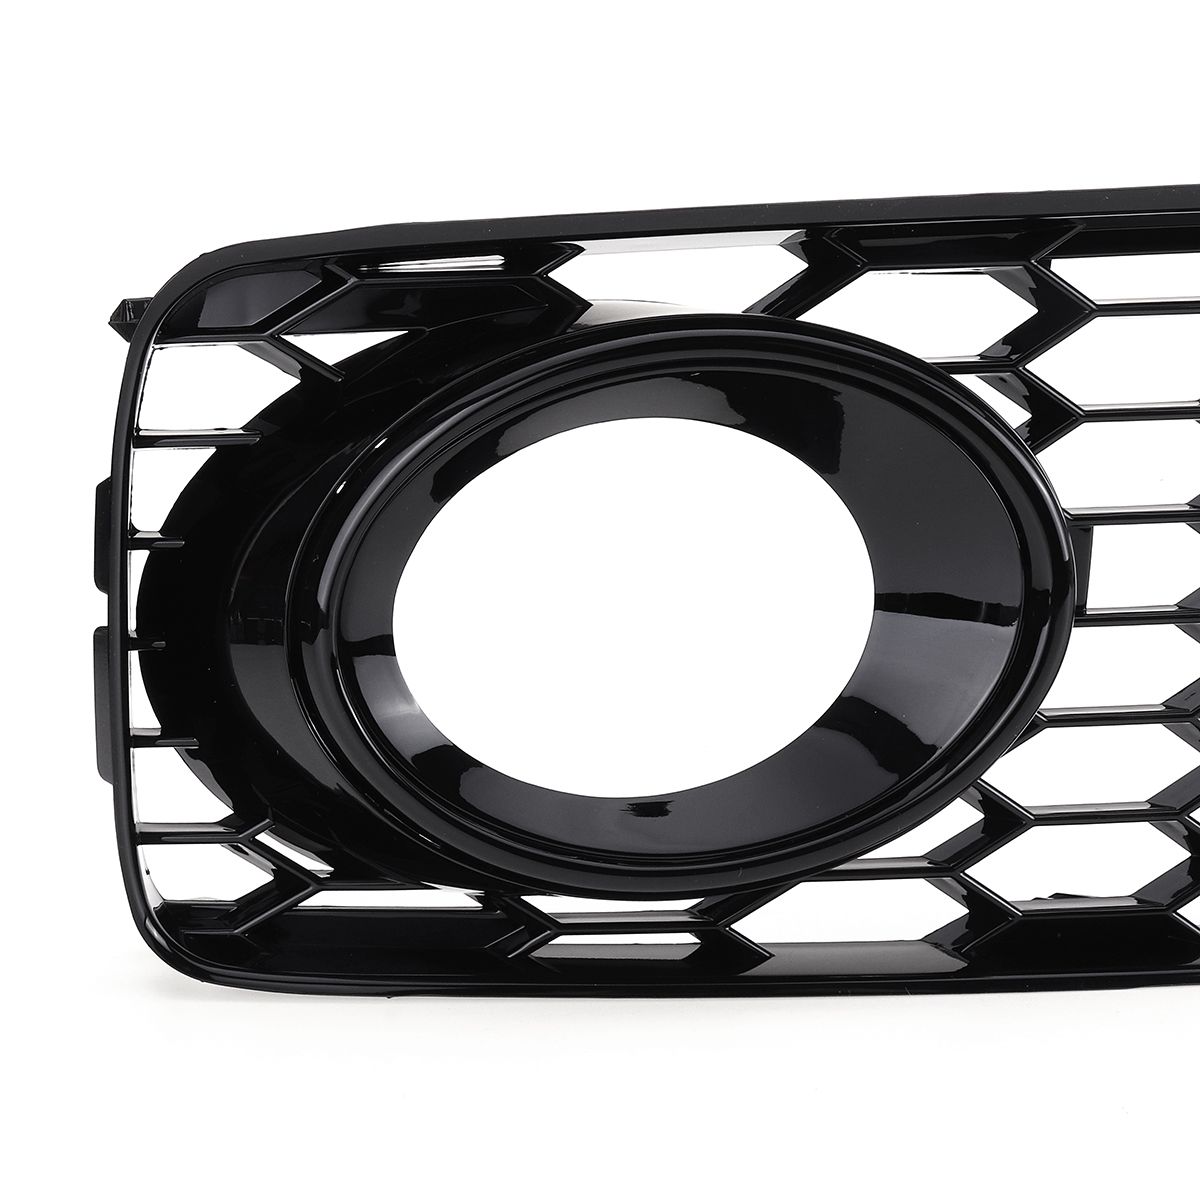 Front-Fog-Light-Lamp-Cover-Grille-Grill-Honeycomb-Hex-Black-For-Audi-A5-S-Line-S5-B8-RS5-2008-2012-1695684